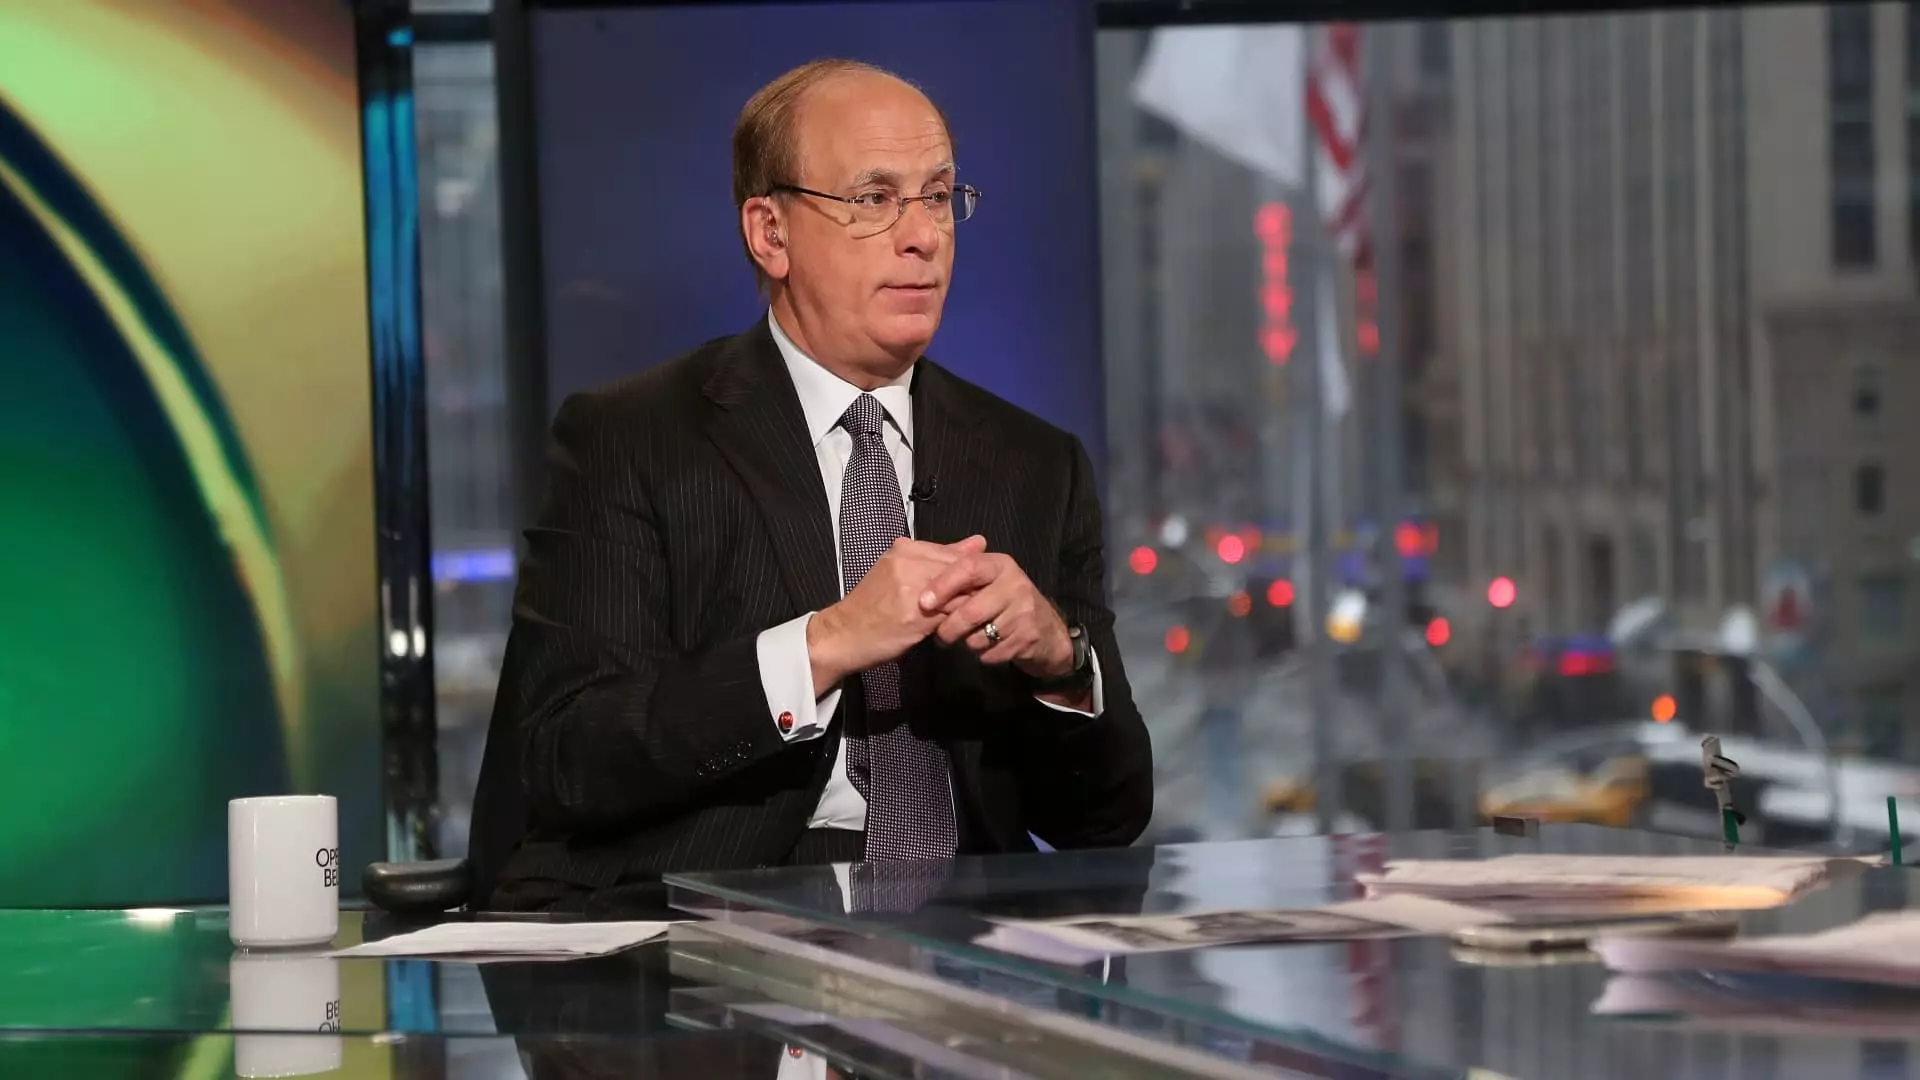 The Retirement Crisis: A Call for Action by BlackRock Chairman Larry Fink